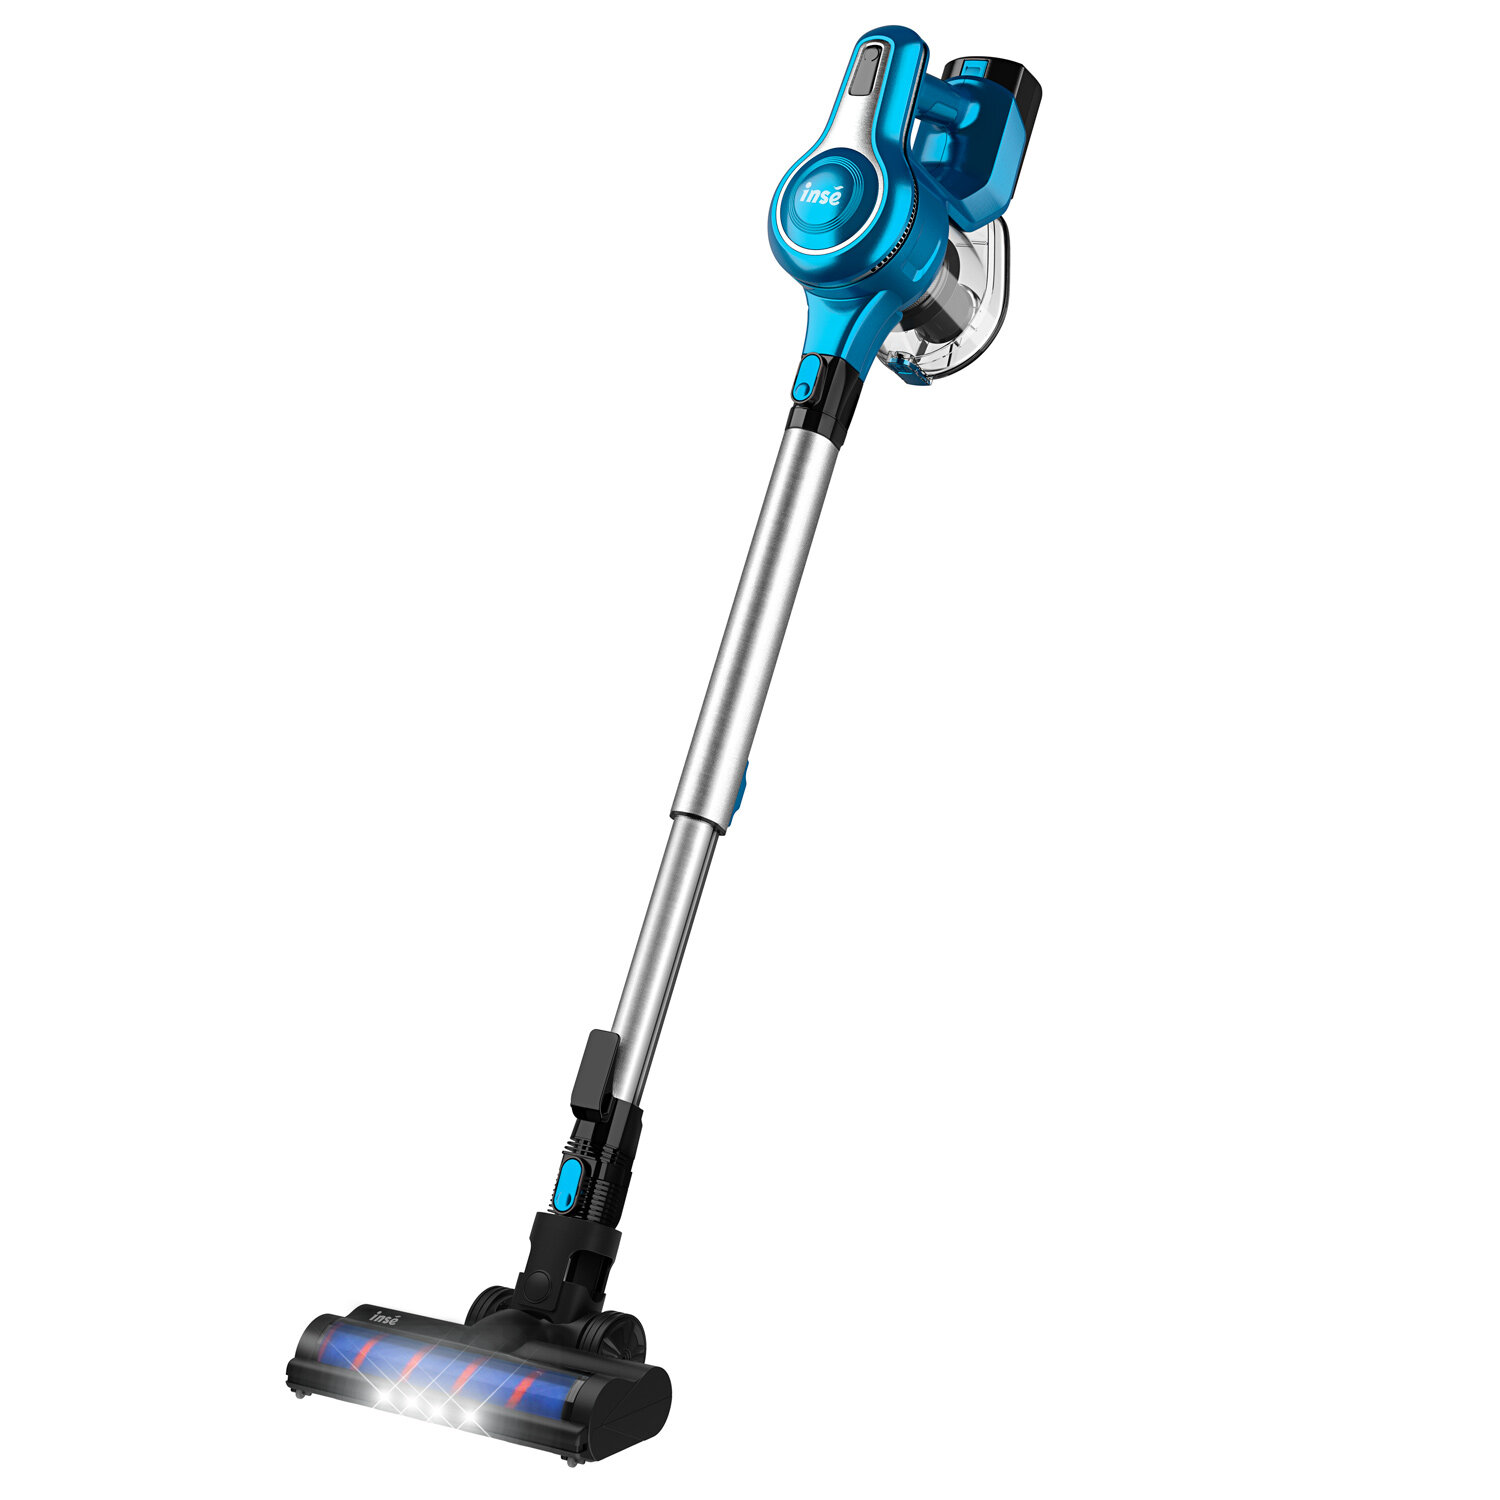 INSE S6 Cordless Vacuum Cleaner 23KPa Suction Power 120000RPM 2 Cleaning Modes 6 Stages High-Efficiency Filtration Syste